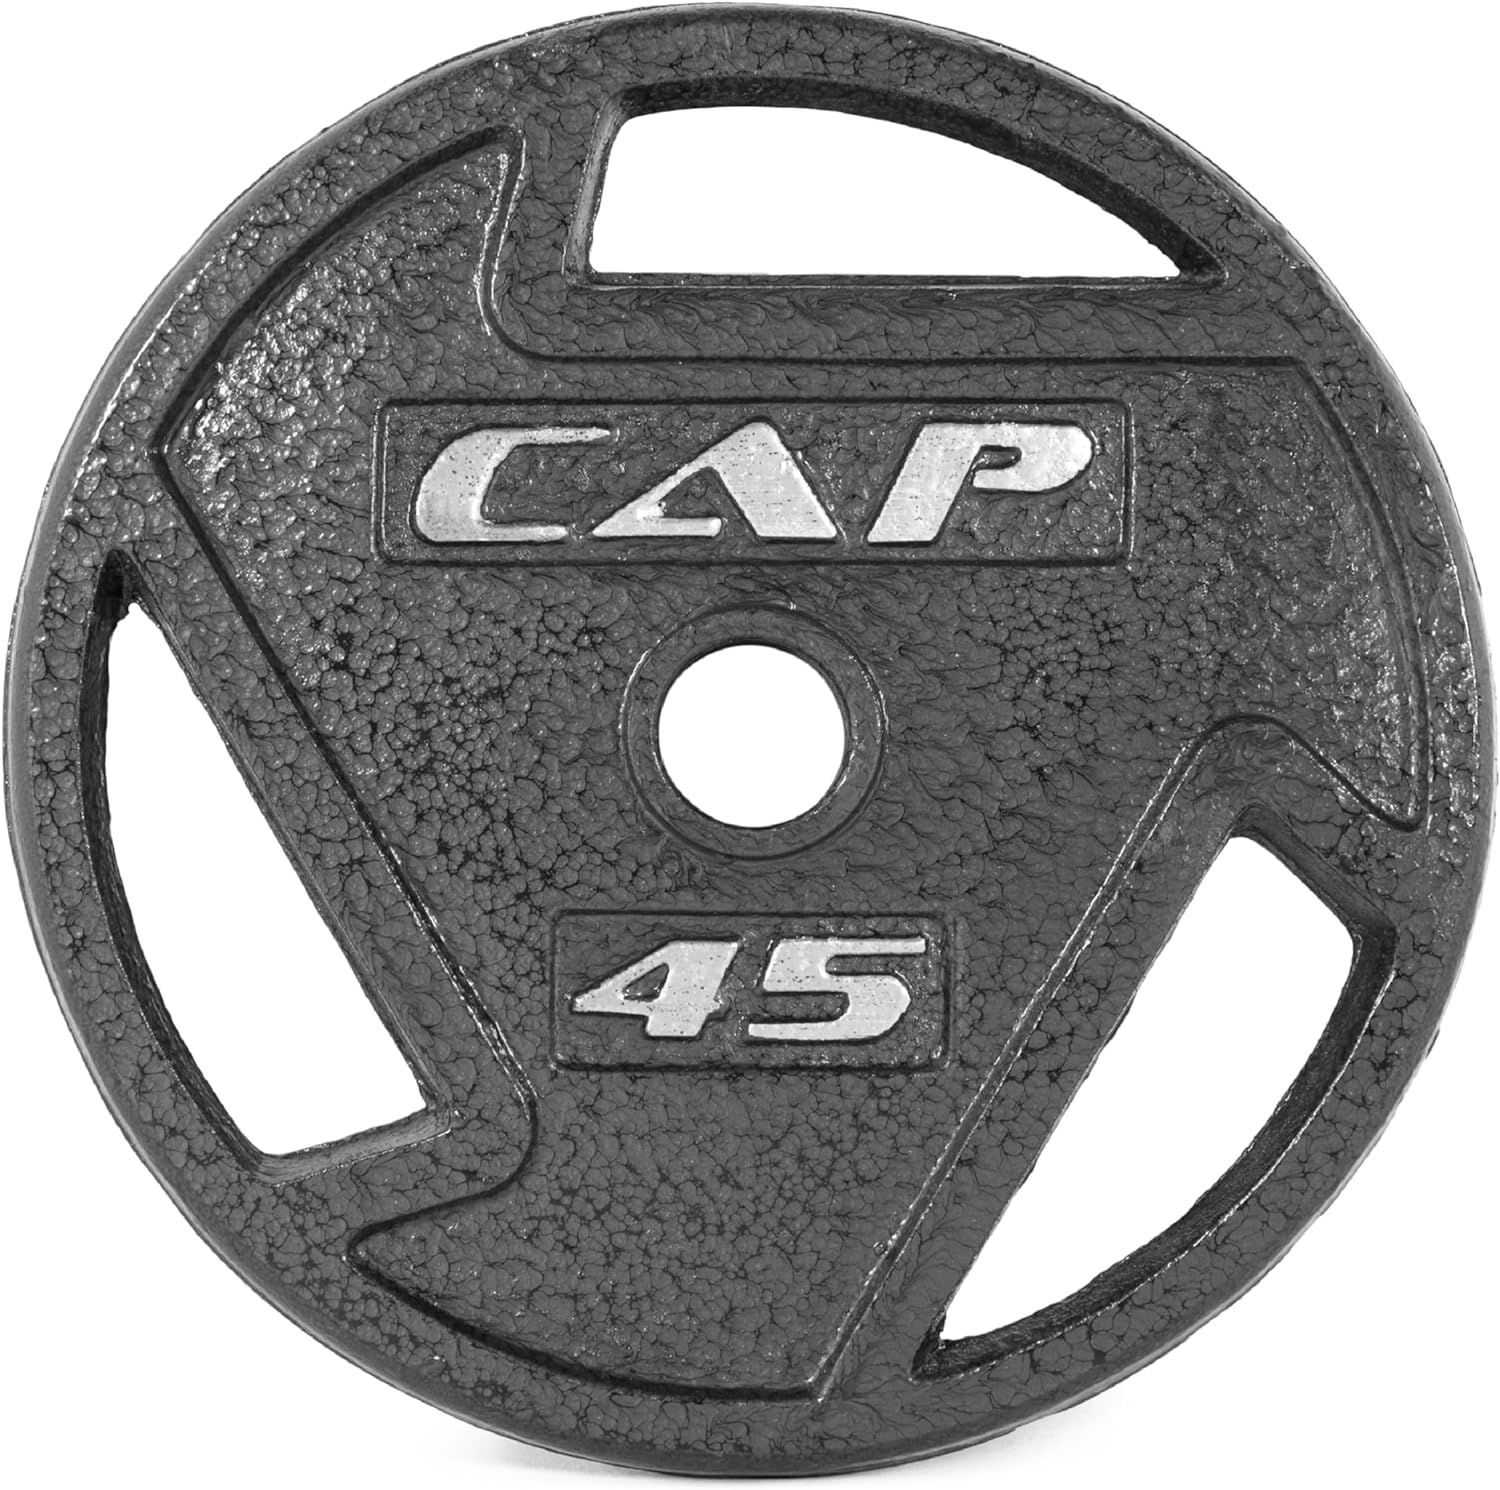 Cap Olympic Grip Weight Plate Collection